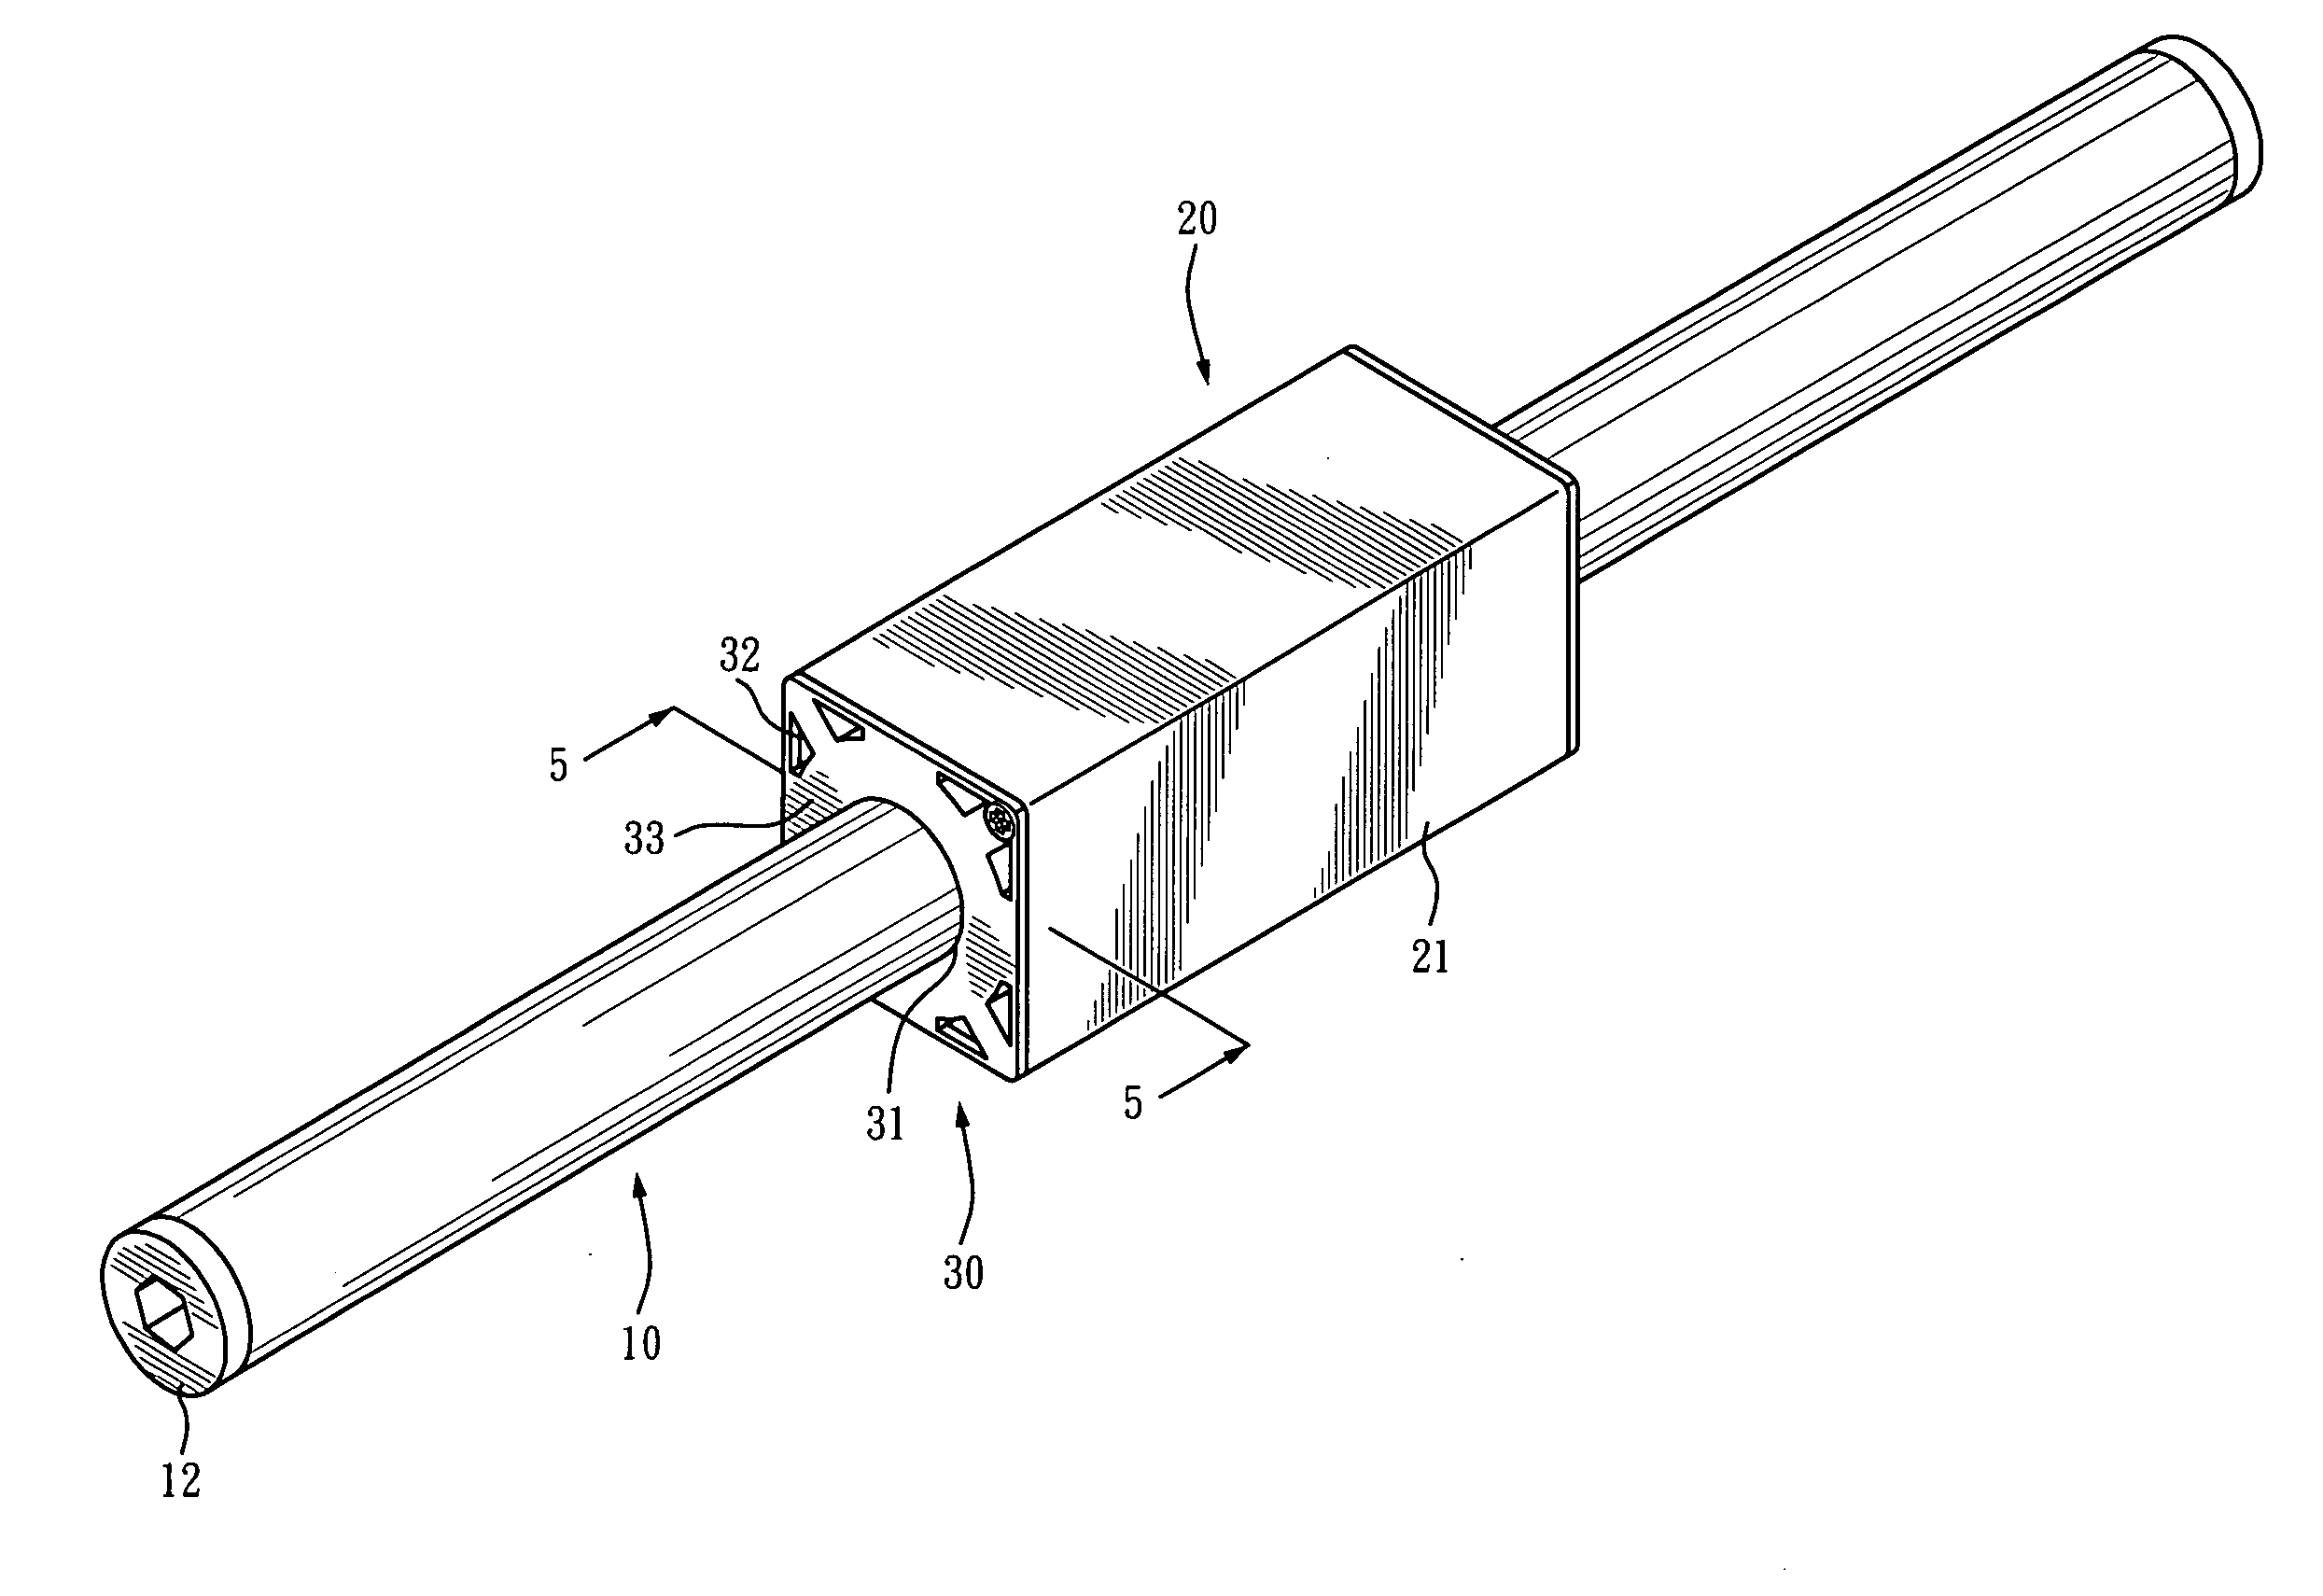 Movable magnet type linear motor with heat-dissipating assembly